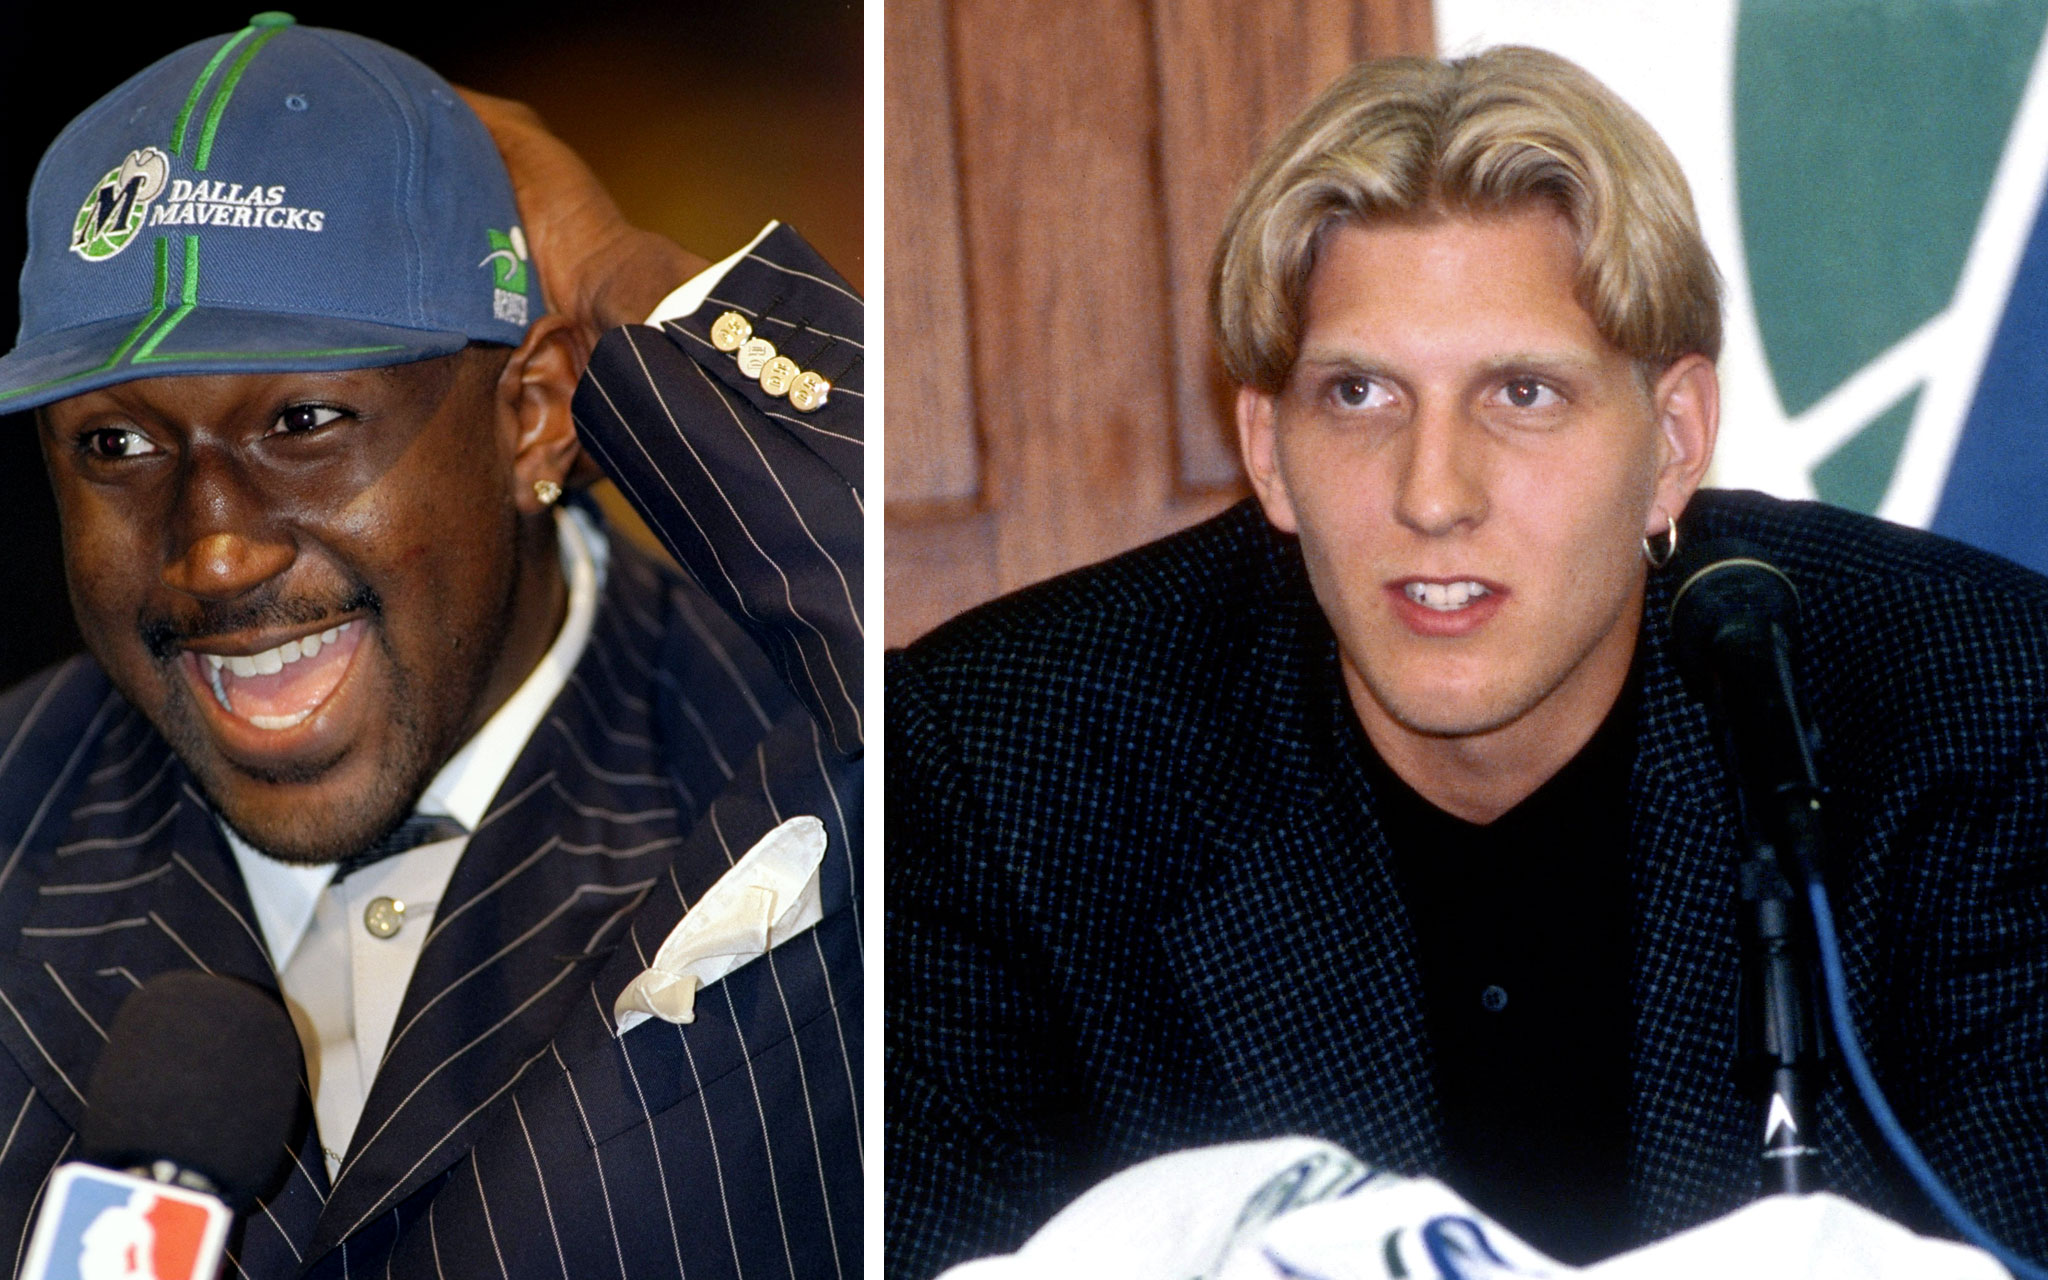 This Day In Dallas Mavericks History: Traylor Out, Big German In ...